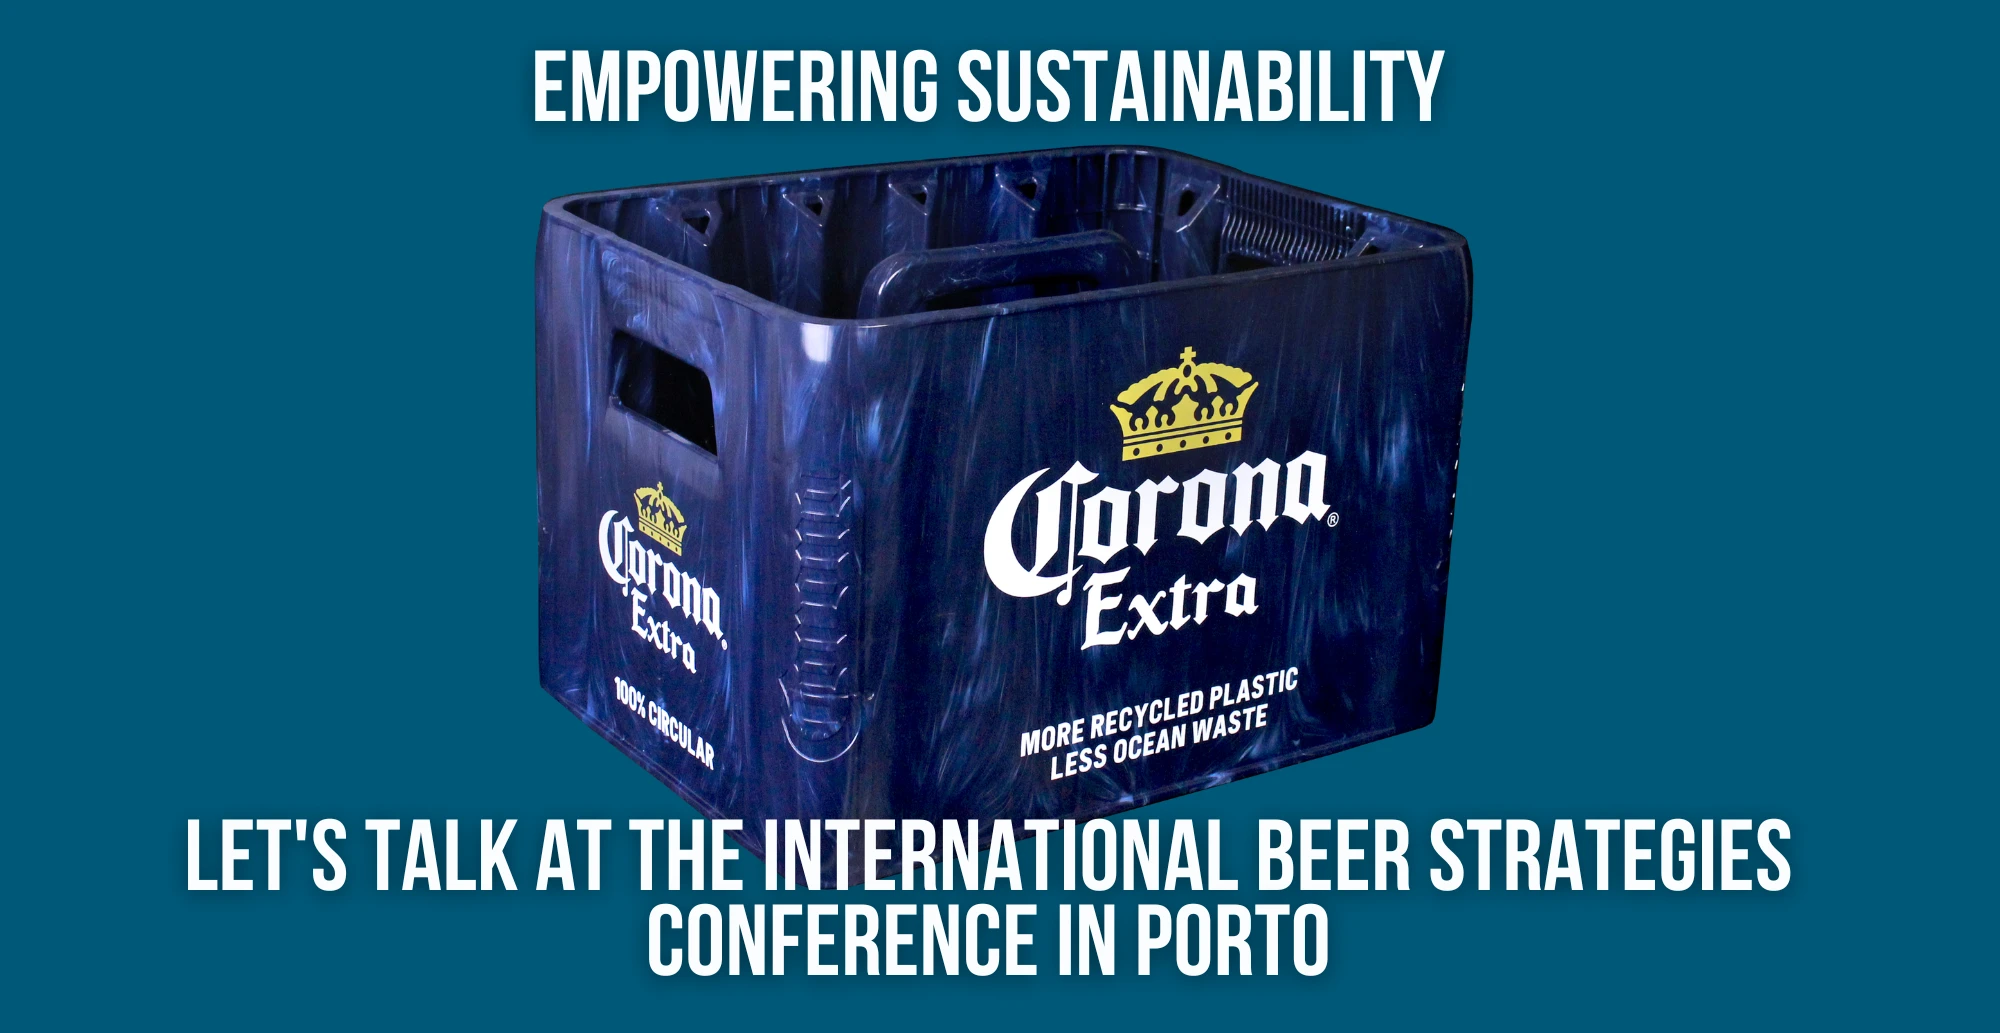 Let's talk at the International Beer Strategies Conference in Porto